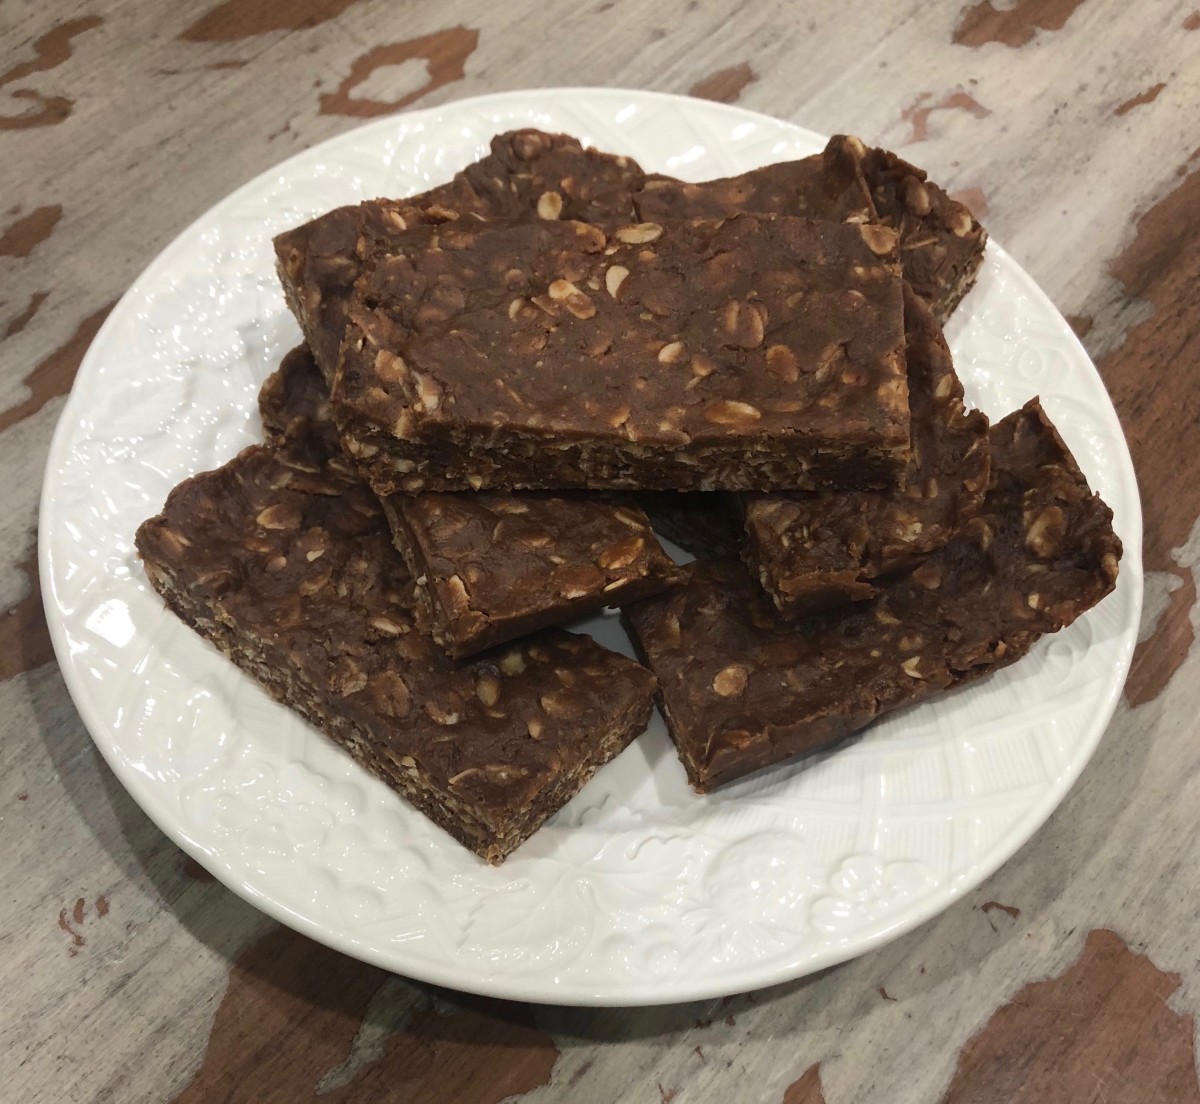 These protein bars are gluten free, dairy free, and super tasty!